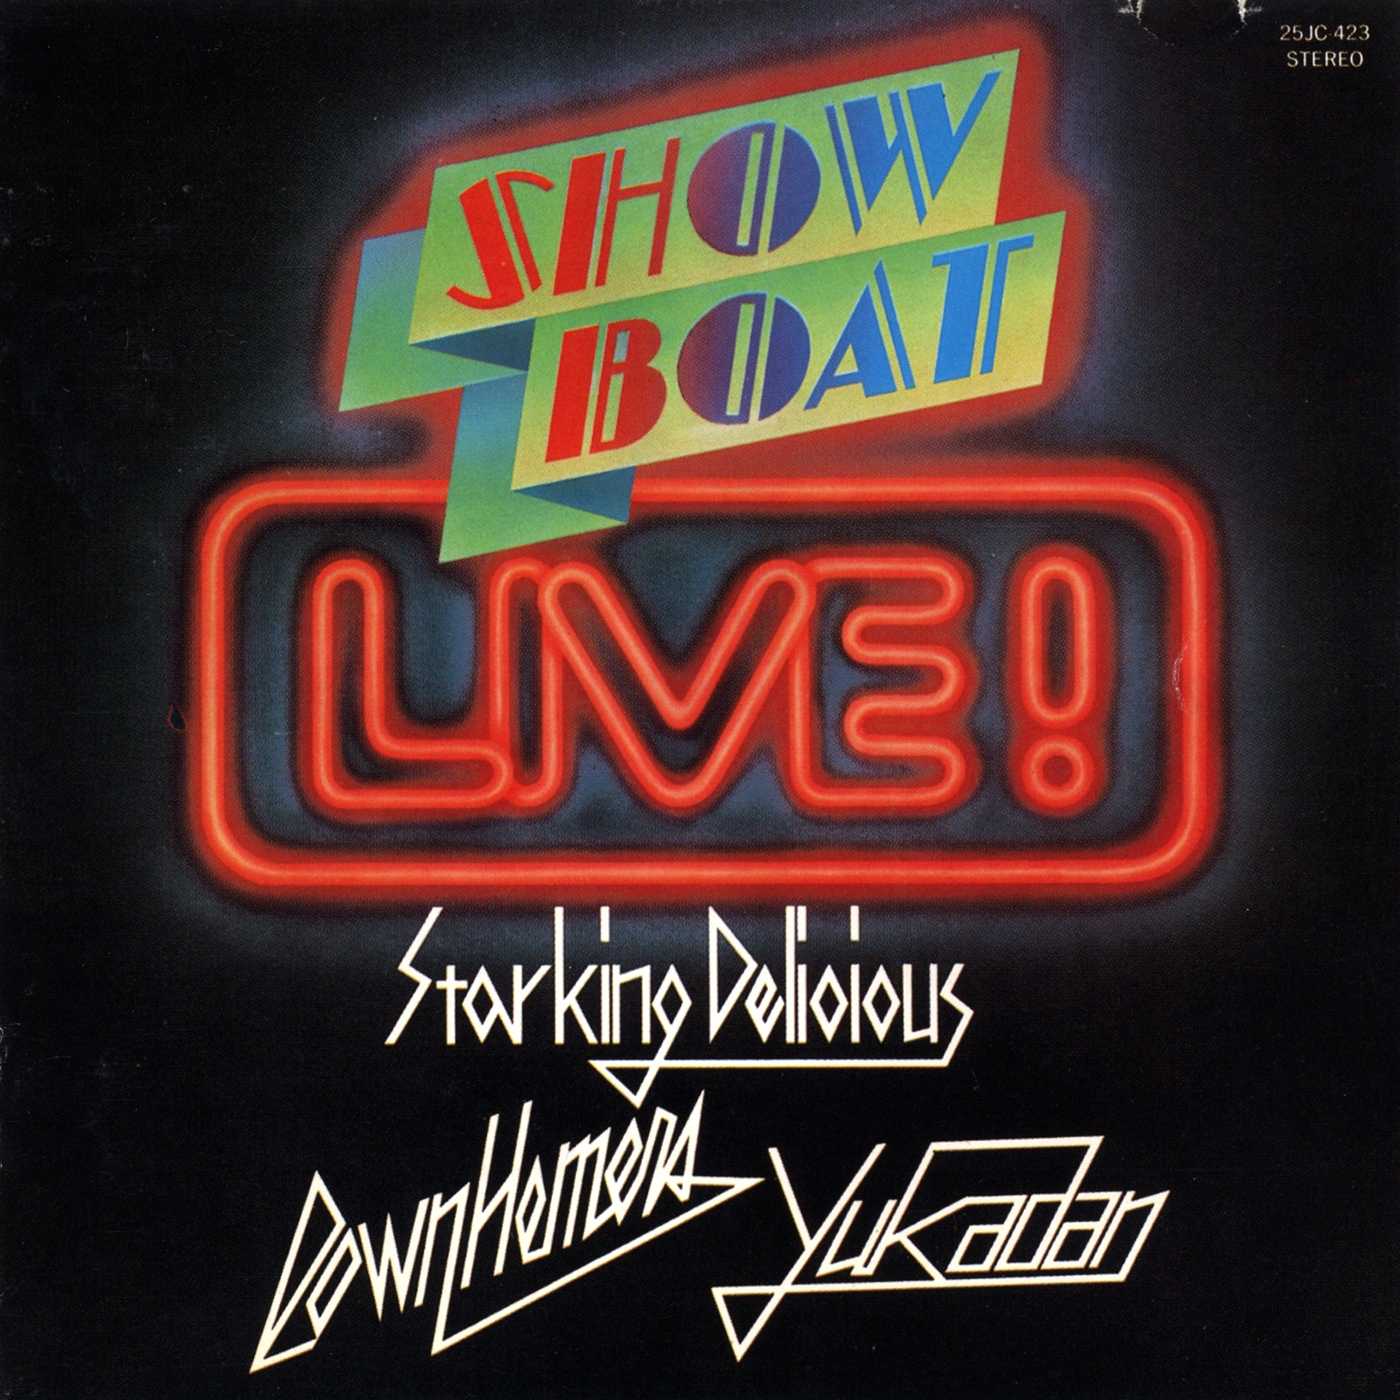 SHOW BOAT LIVE